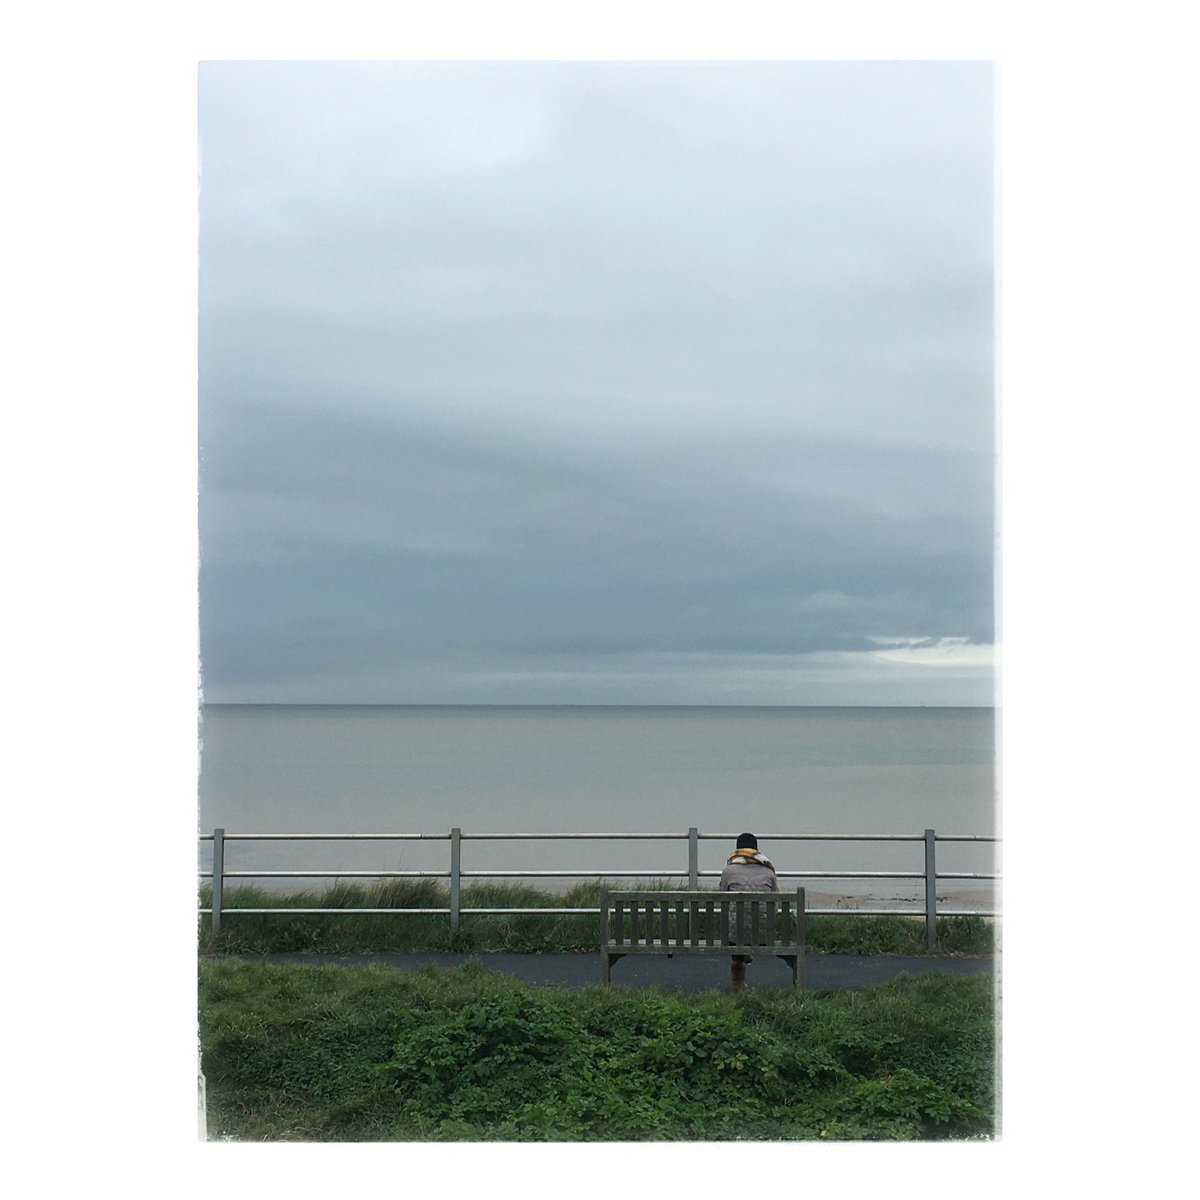 Loving the peace and quiet here this morning, muted tones and near solitude are great for clearing the mind before work. #landscapephotography #alone #solitude #coastal #dogwalks #mentalhealth #artists #kent